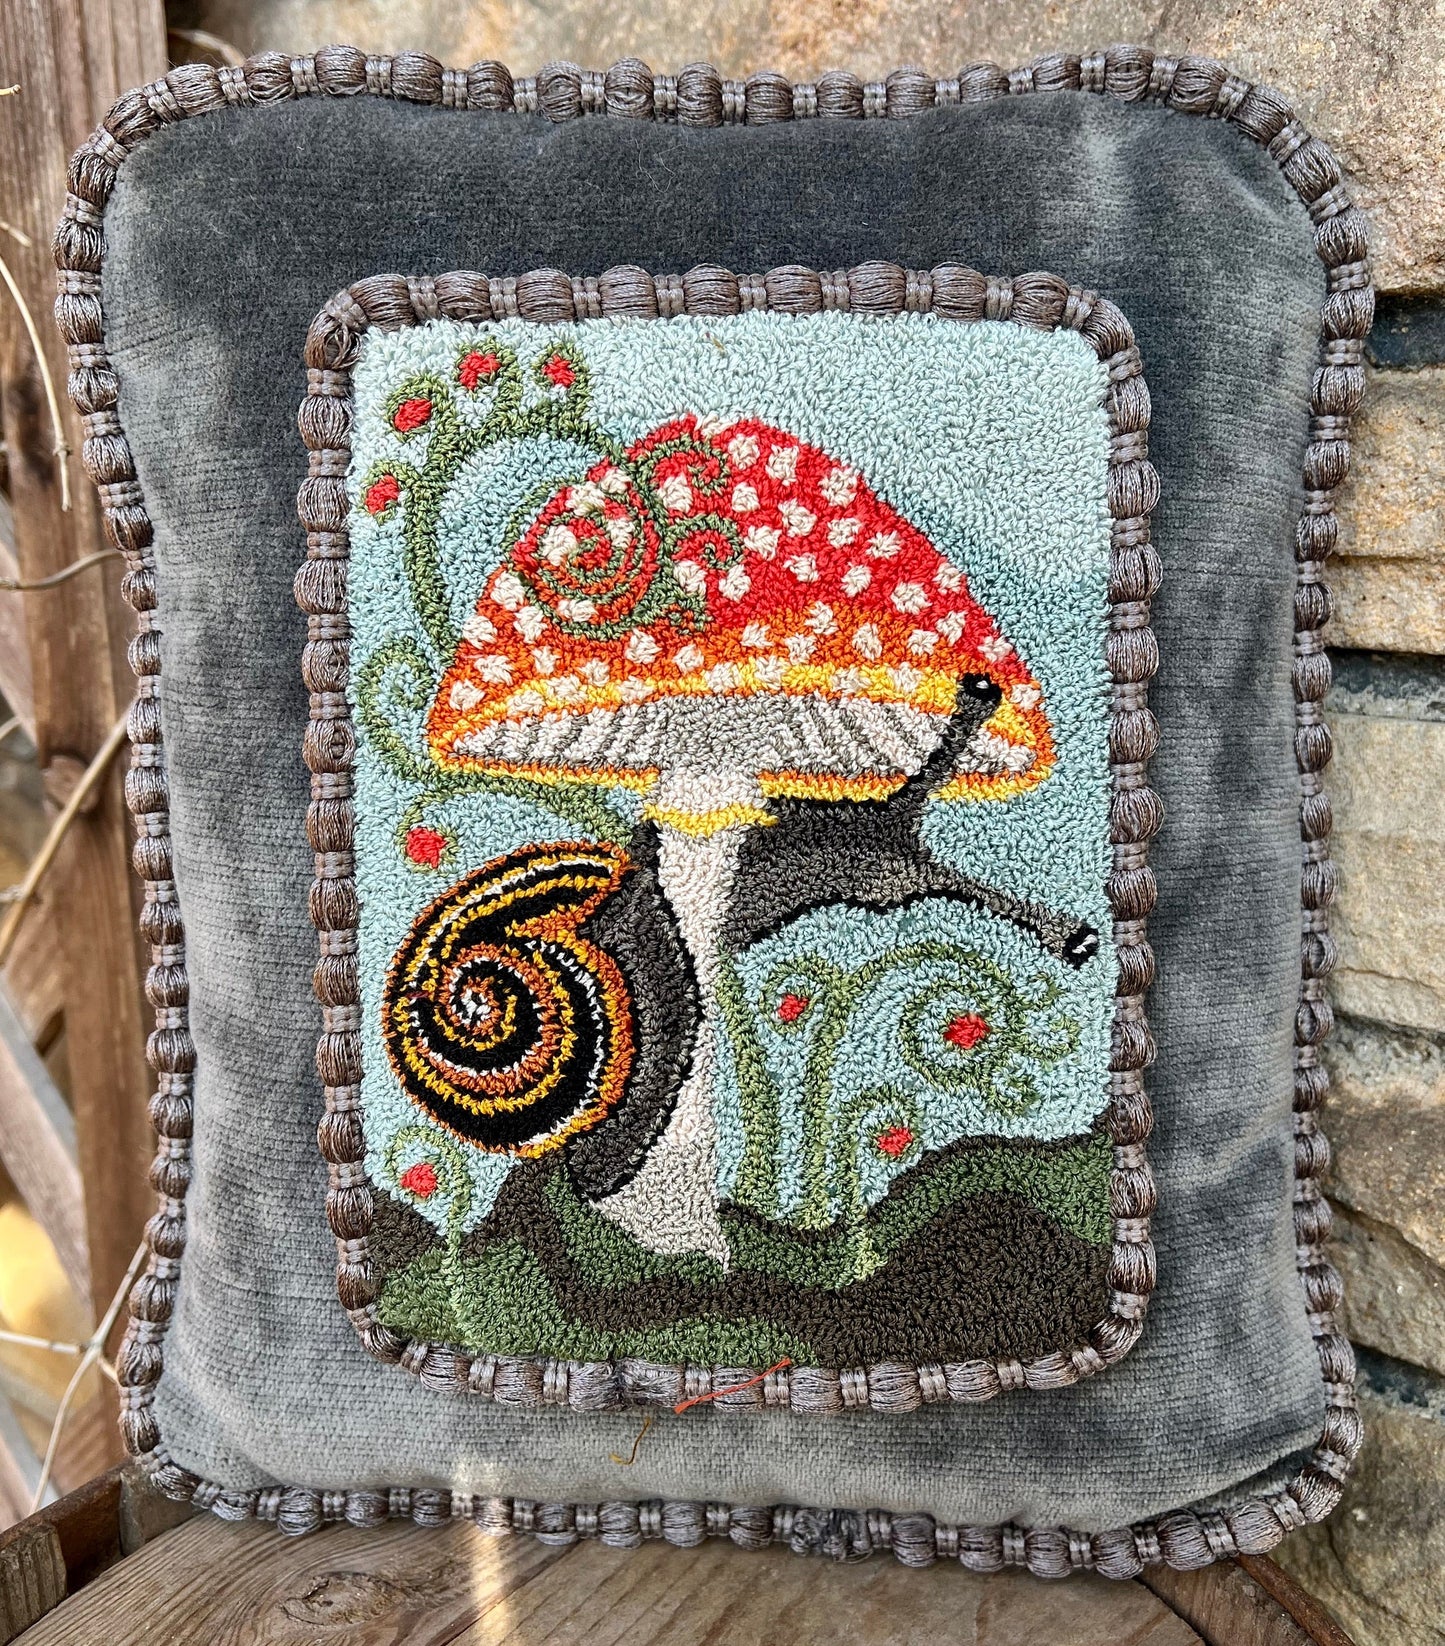 The Pattern Entwined is an PDF digial downloadable punch Needle Embroidery pattern that used thread and a punch needle to create the design. Entwined design depicts a snail wrapping itself around a colorful mushroom. Copyright © 2024 Kelly Kanyok of Orphaned Wool.